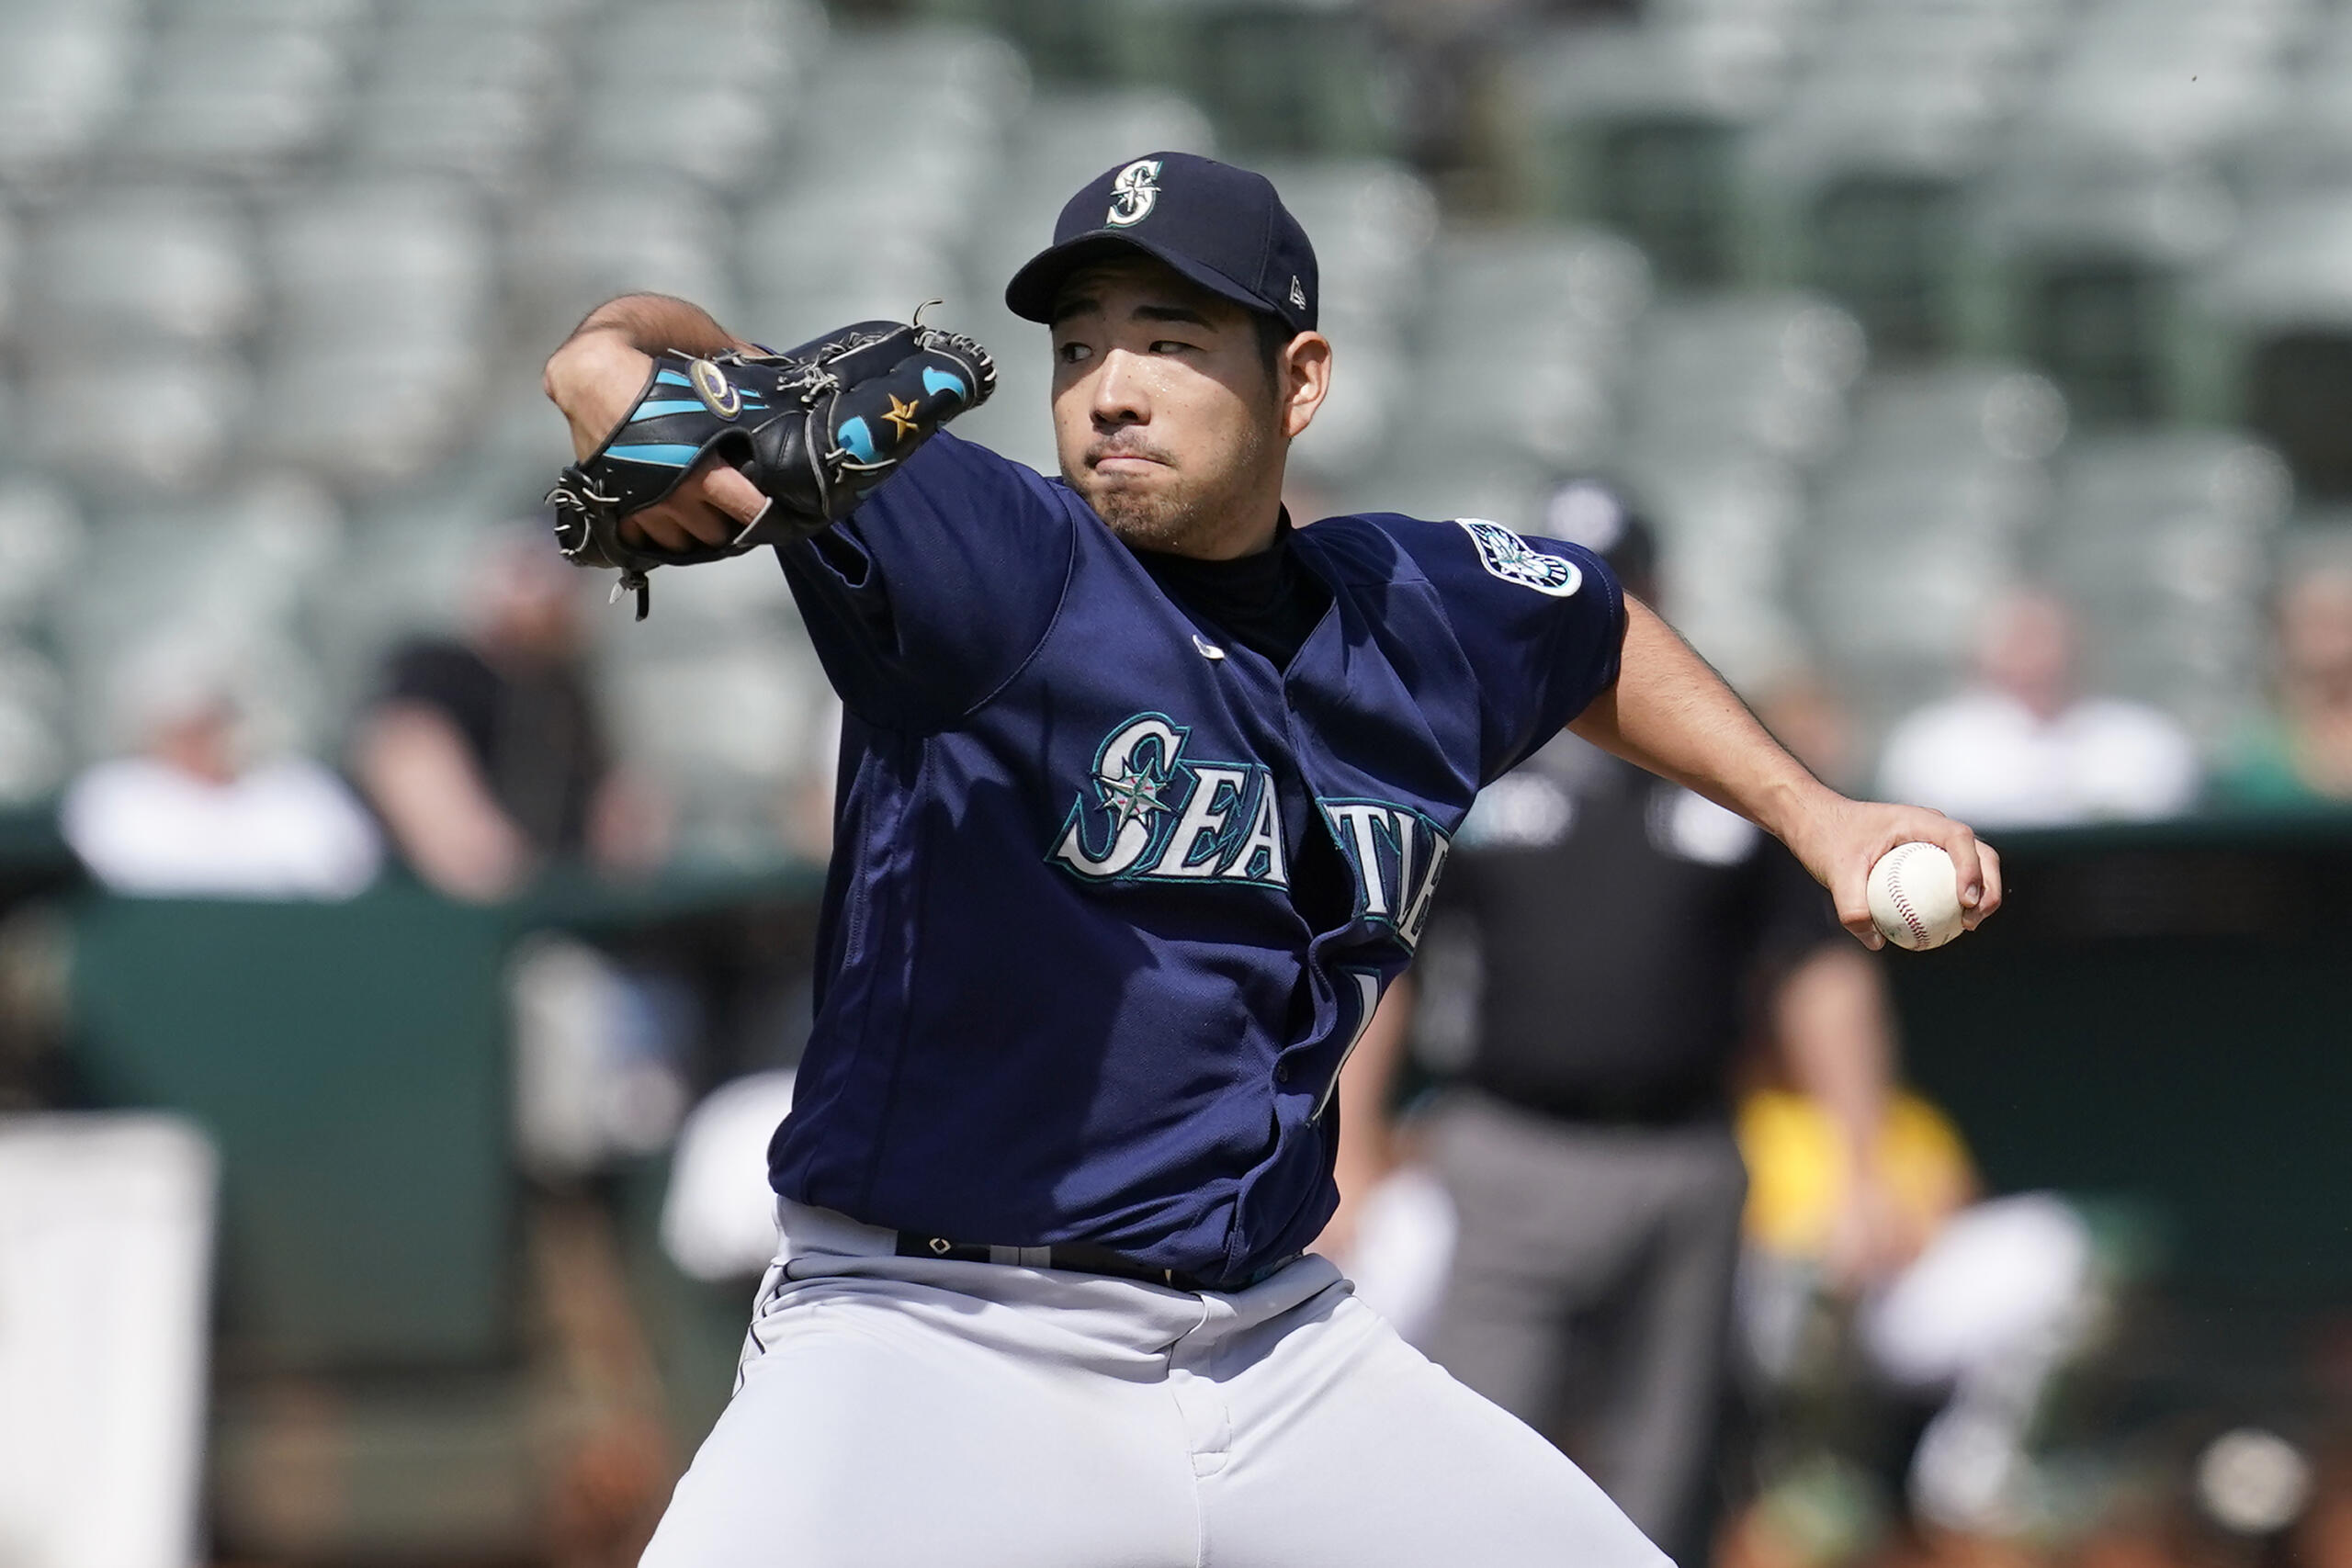 Yusei Kikuchi is leaving the Seattle Mariners after the team declined a club option on the All-Star and Kikuchi opted for free agency. The Mariners announced the decision with Kikuchi on Wednesday, Nov. 3, 2021.